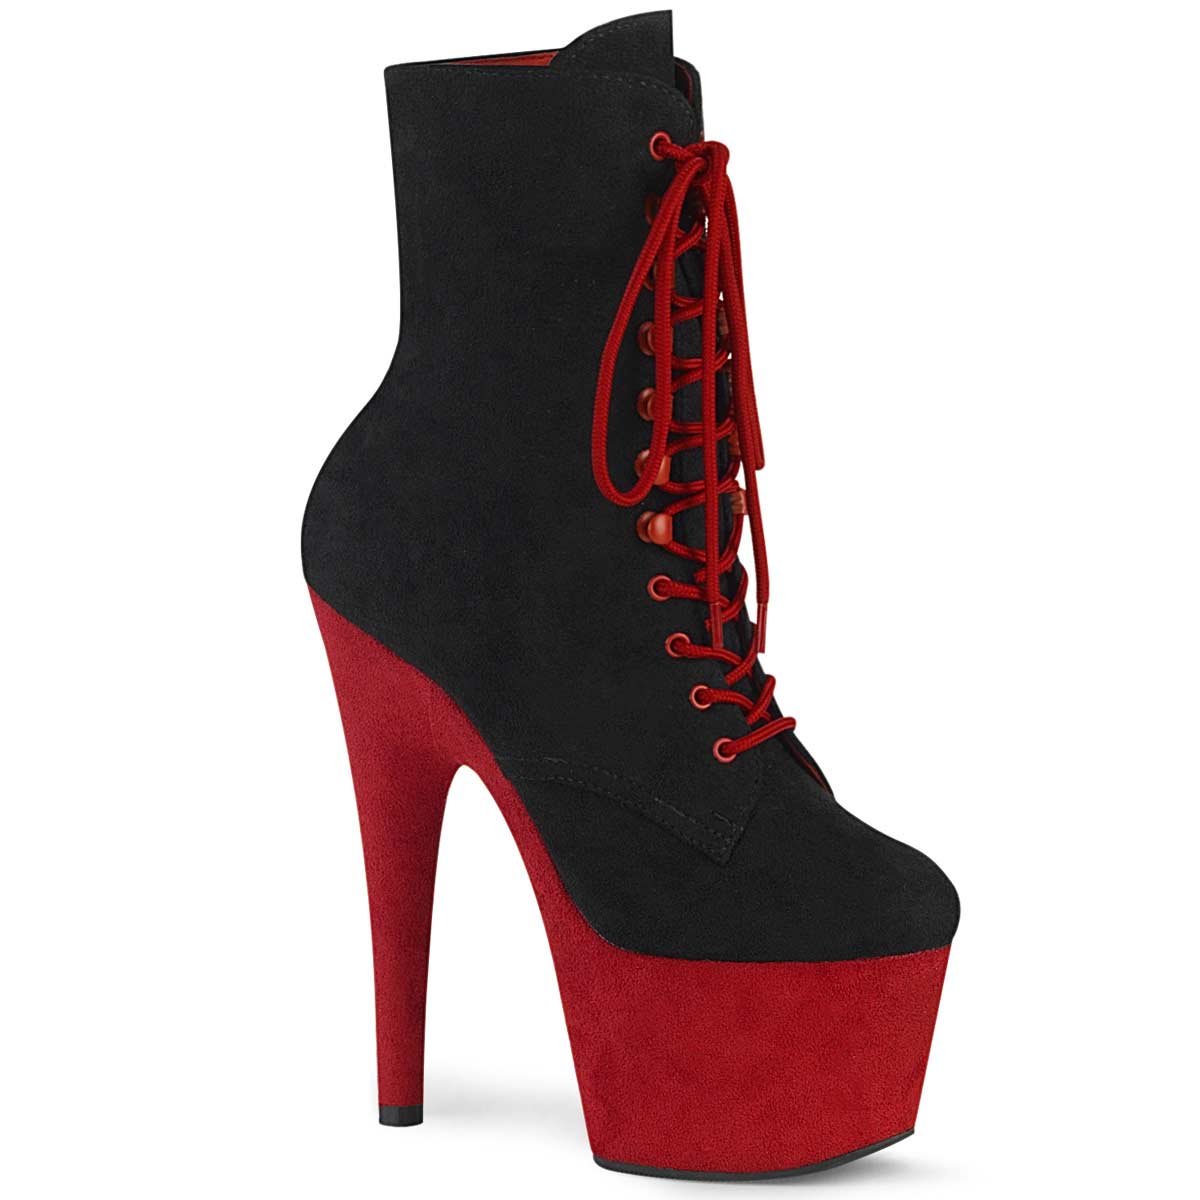 Pleaser Adore-1020FSTT - Black Faux Suede Red in Sexy Boots - $60.71